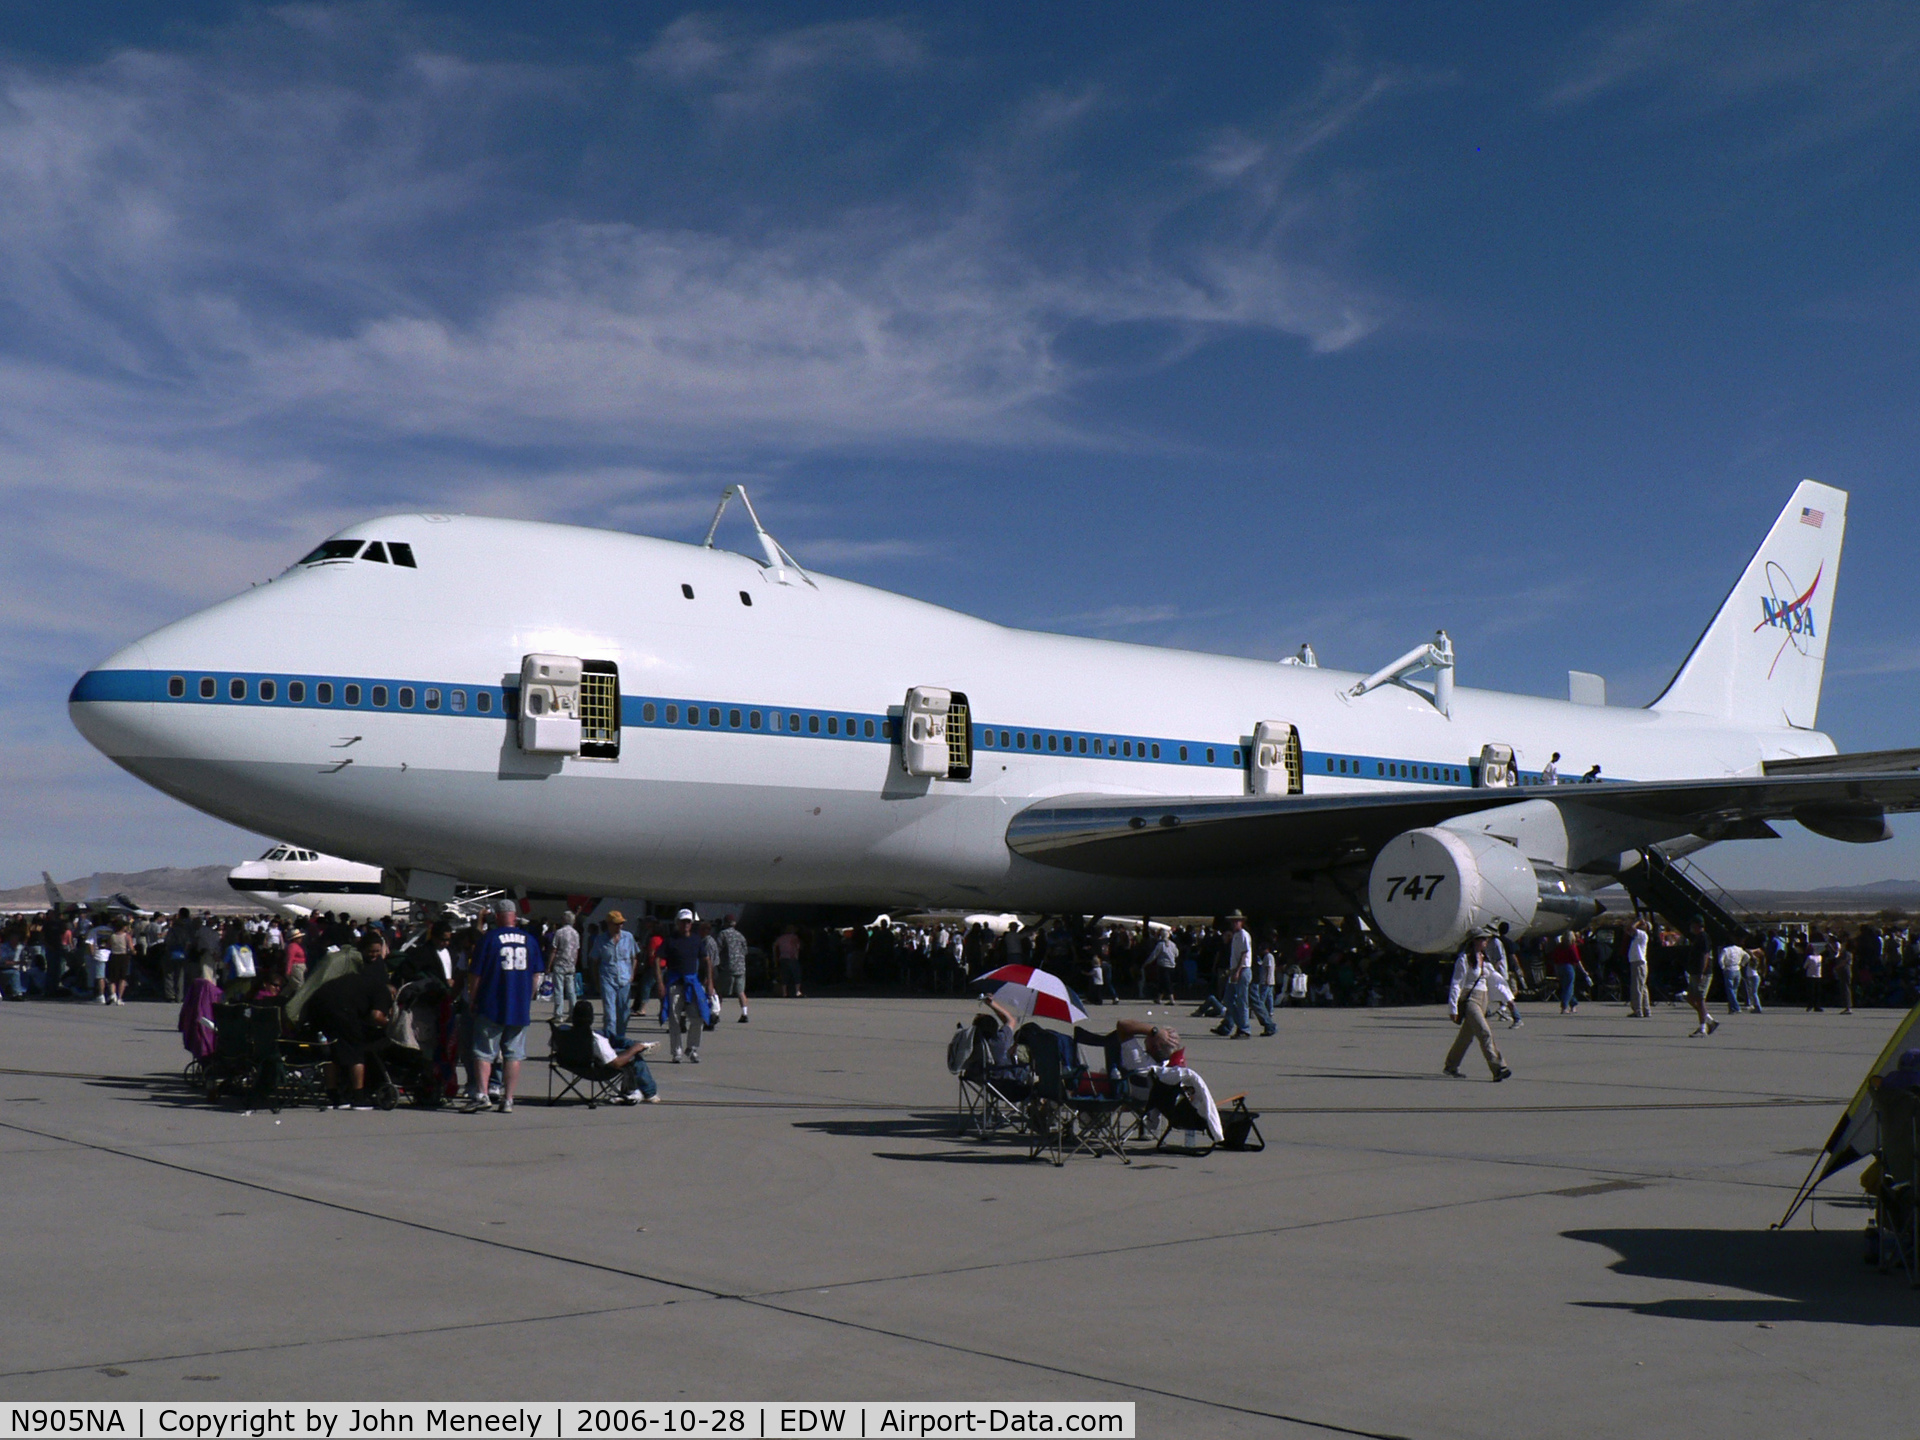 N905NA, 1970 Boeing 747-123 C/N 20107, One of the static exhibits at Edwards AFB's open house